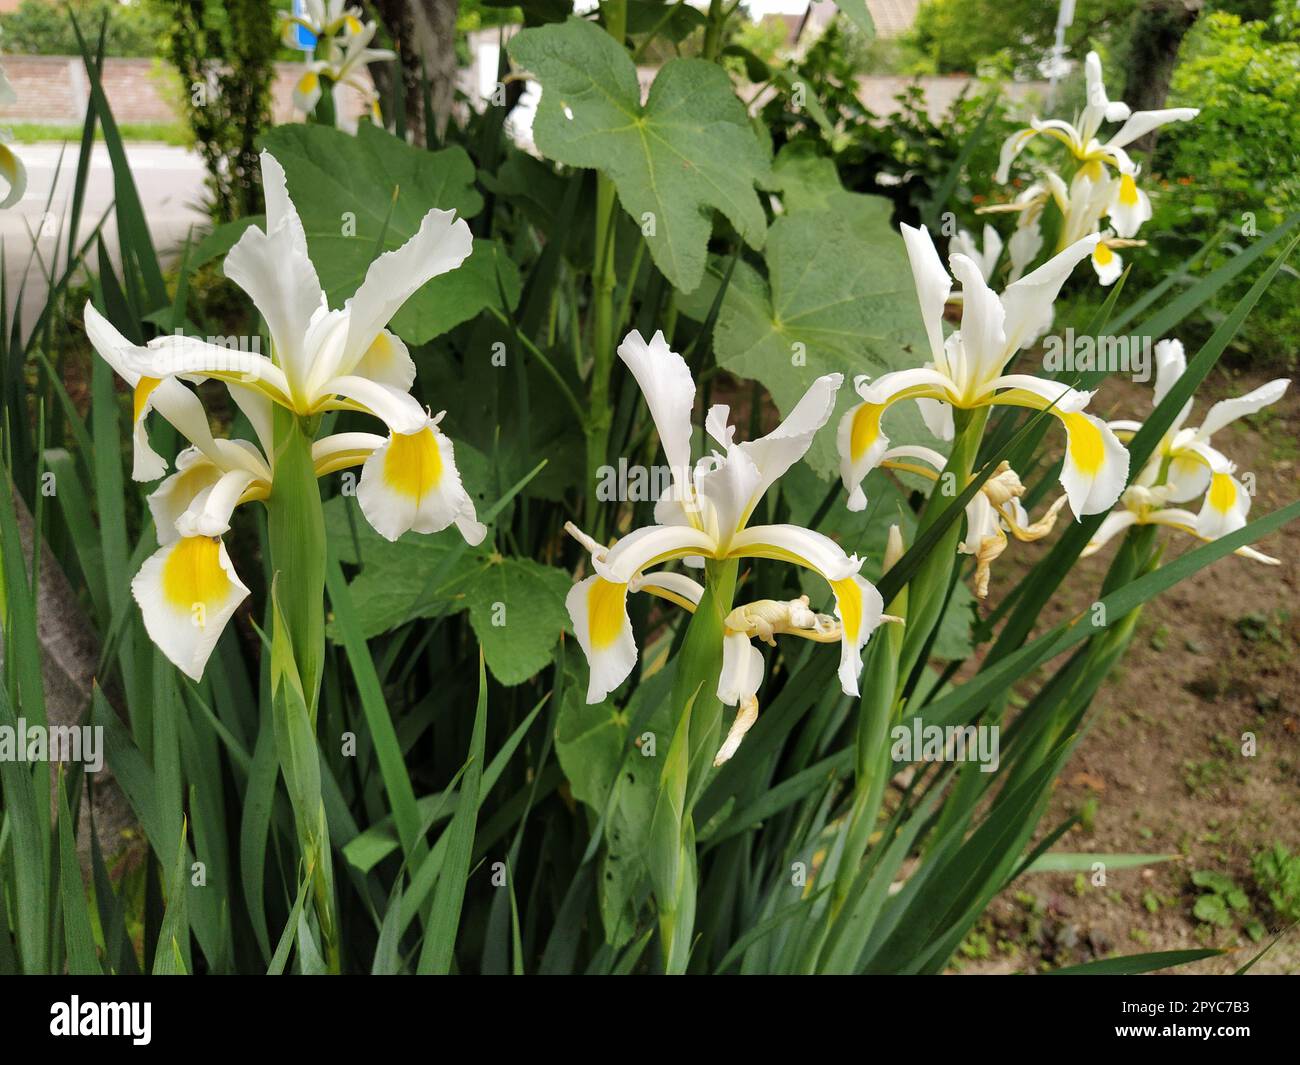 White irises with a yellow middle of the flower. Flowerbed in the garden with tall beautiful plants Stock Photo